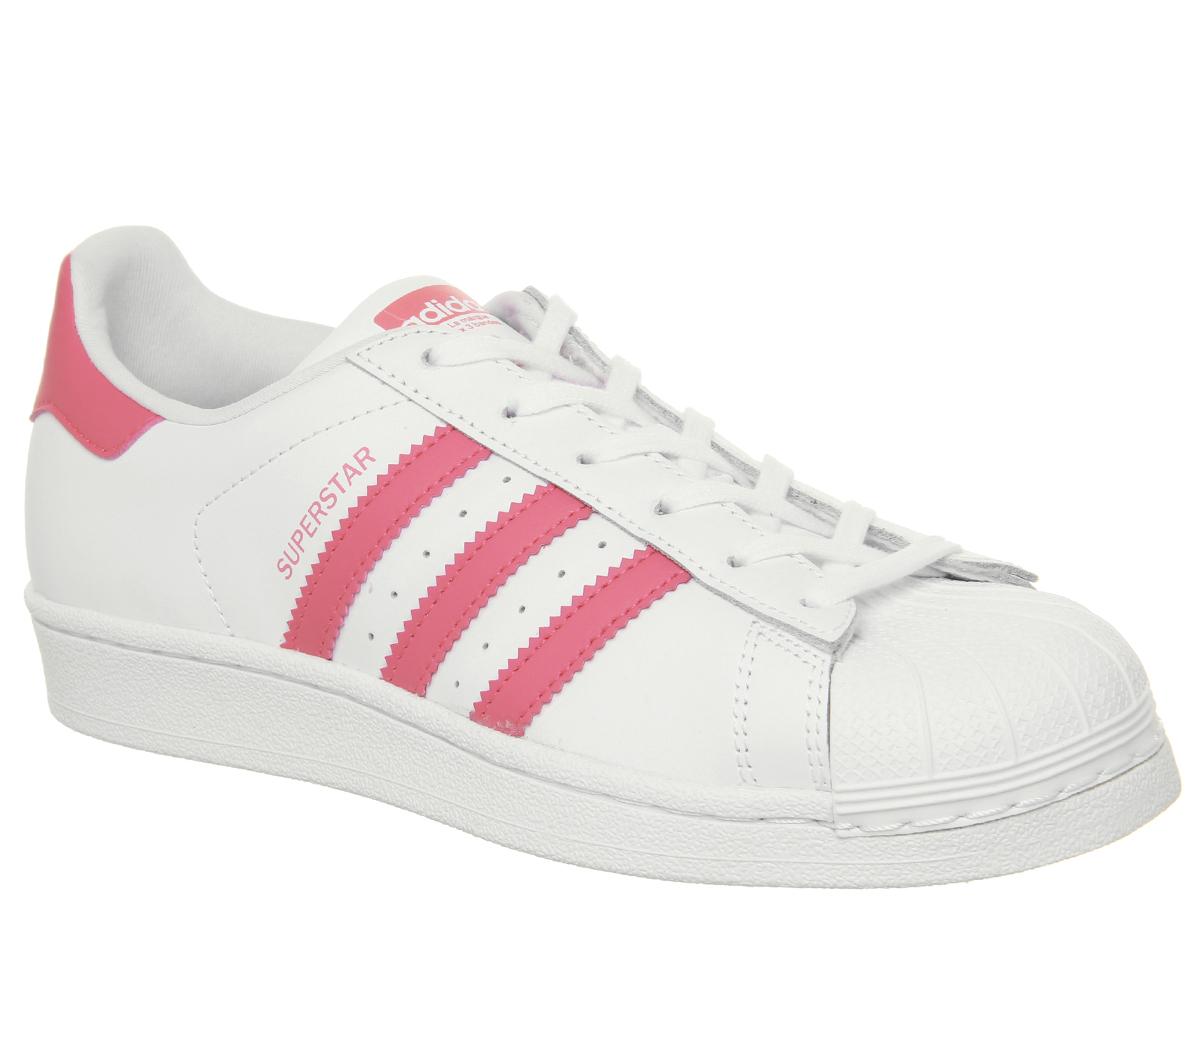 adidas Superstar Gs Trainers White Clear Pink - Hers trainers